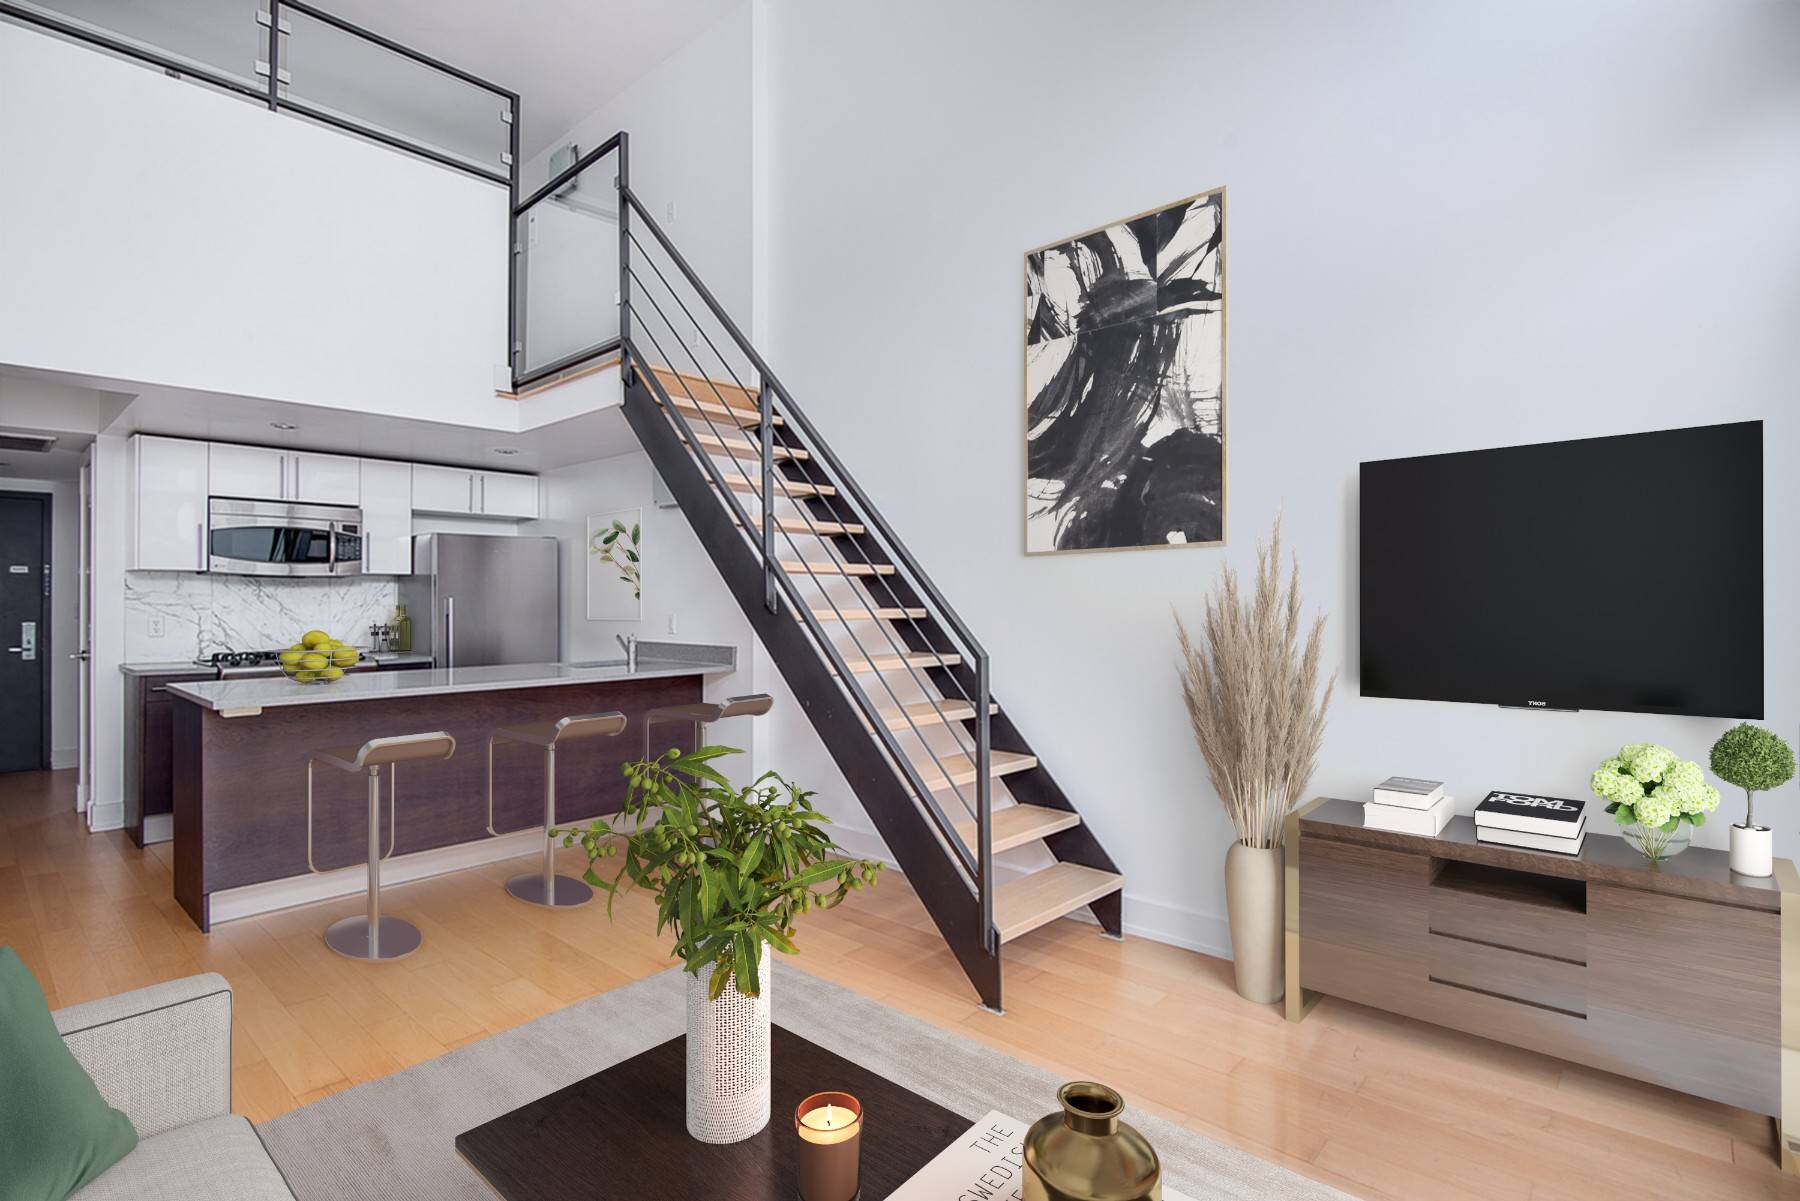 Welcome Home ! This beautiful, modern one bedroom loft has 17 foot ceilings, gorgeous hardwood floors, a chef's kitchen, stainless steel appliances and a dishwasher.